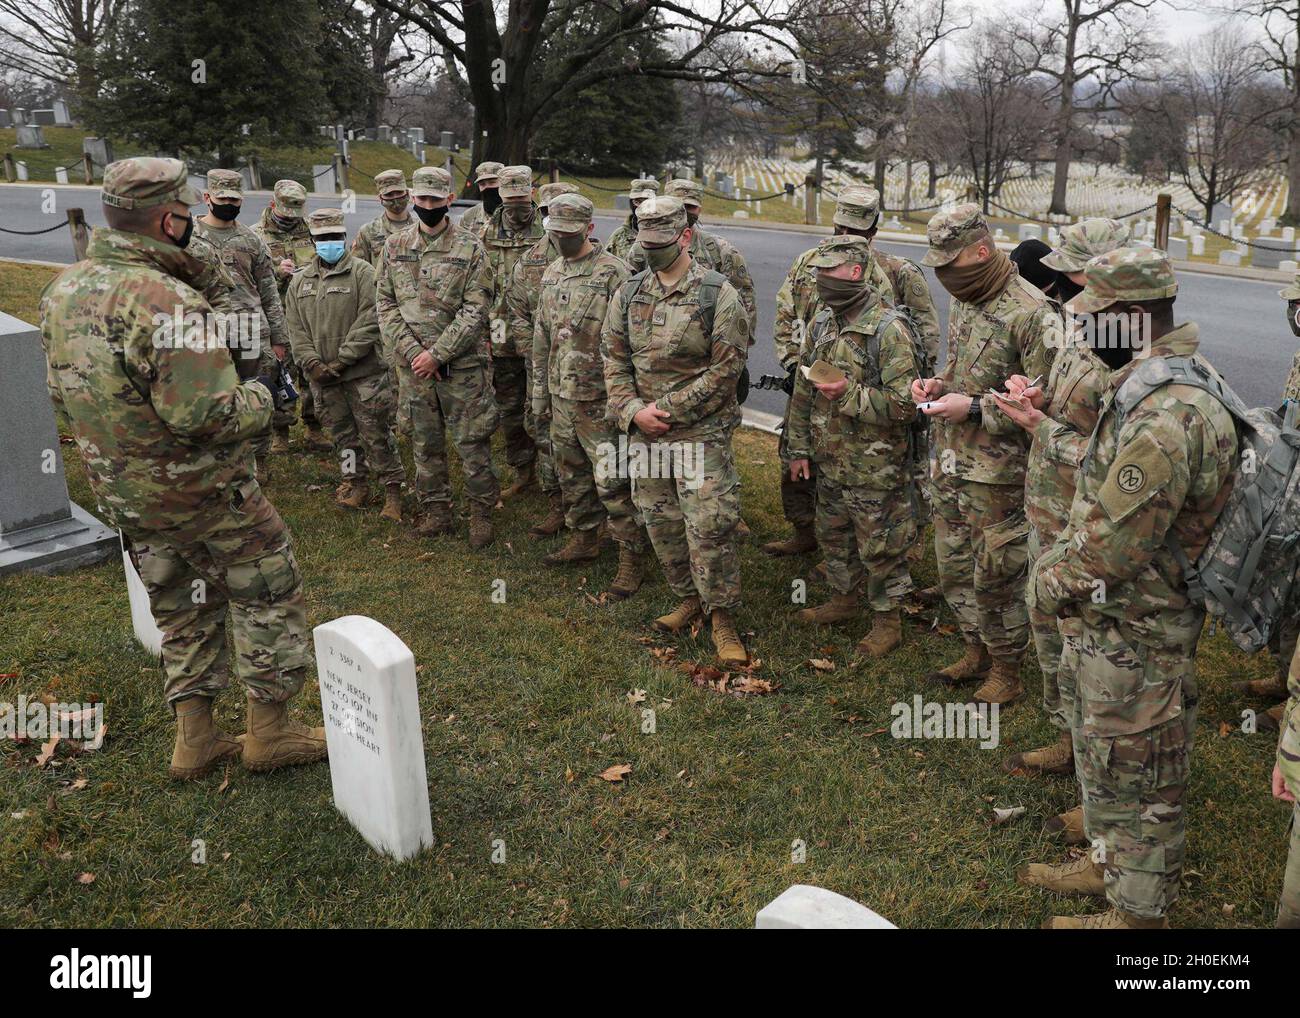 U.S. Soldiers with the 27th Infantry Brigade Combat Team, 42nd Infantry Division, New York National Guard, learn about the history and heroic actions of Medal of Honor recipient Sgt. Alan L. Eggers during a visit to the Arlington National Cemetery in Arlington, Va., Feb. 14, 2021.  Eggers, a World War I veteran of the New York National Guard’s 27th Infantry Division, received the Medal of Honor with two other Soldiers for their heroic actions in combat near Le Catelet, France, Sept. 29, 2918. Stock Photo